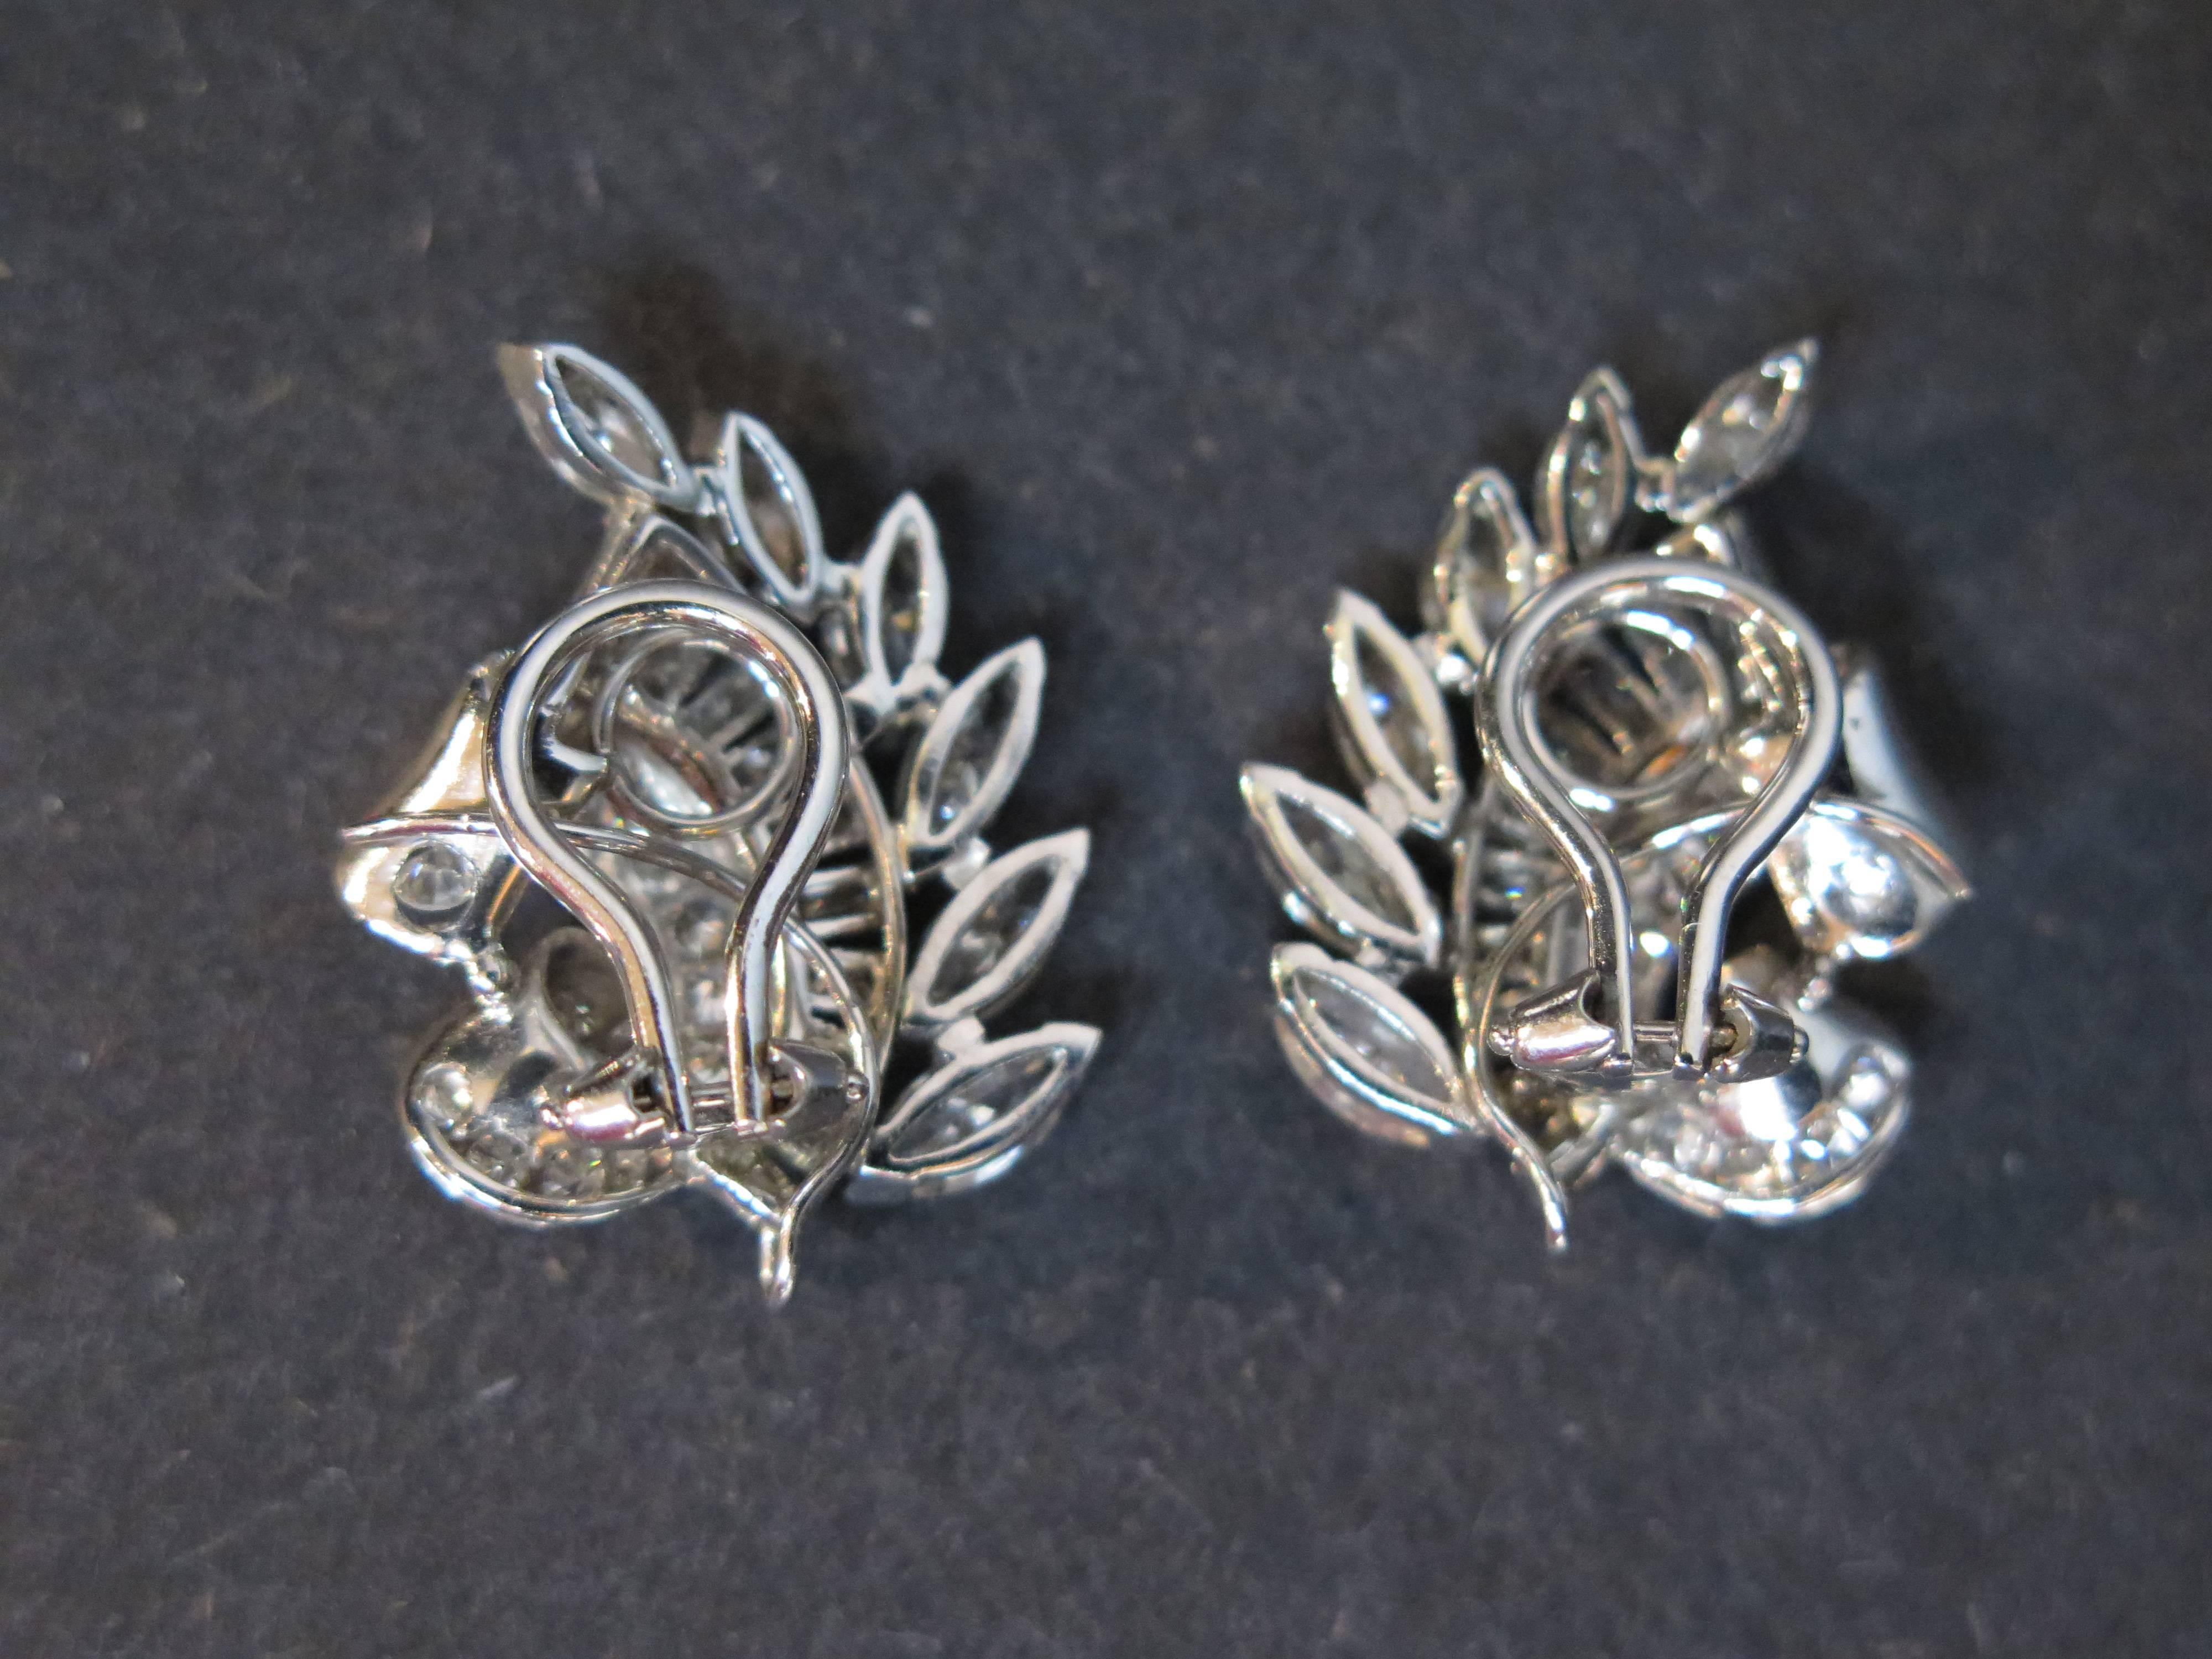 A wonderful and bright pair of elegant diamond and platinum ear clip earrings in a classic 1960's French style. 

The diamond clip earrings formed as swooping stylized wheat sheaves. 
A looped hook at the bottom of the earrings allows one to add